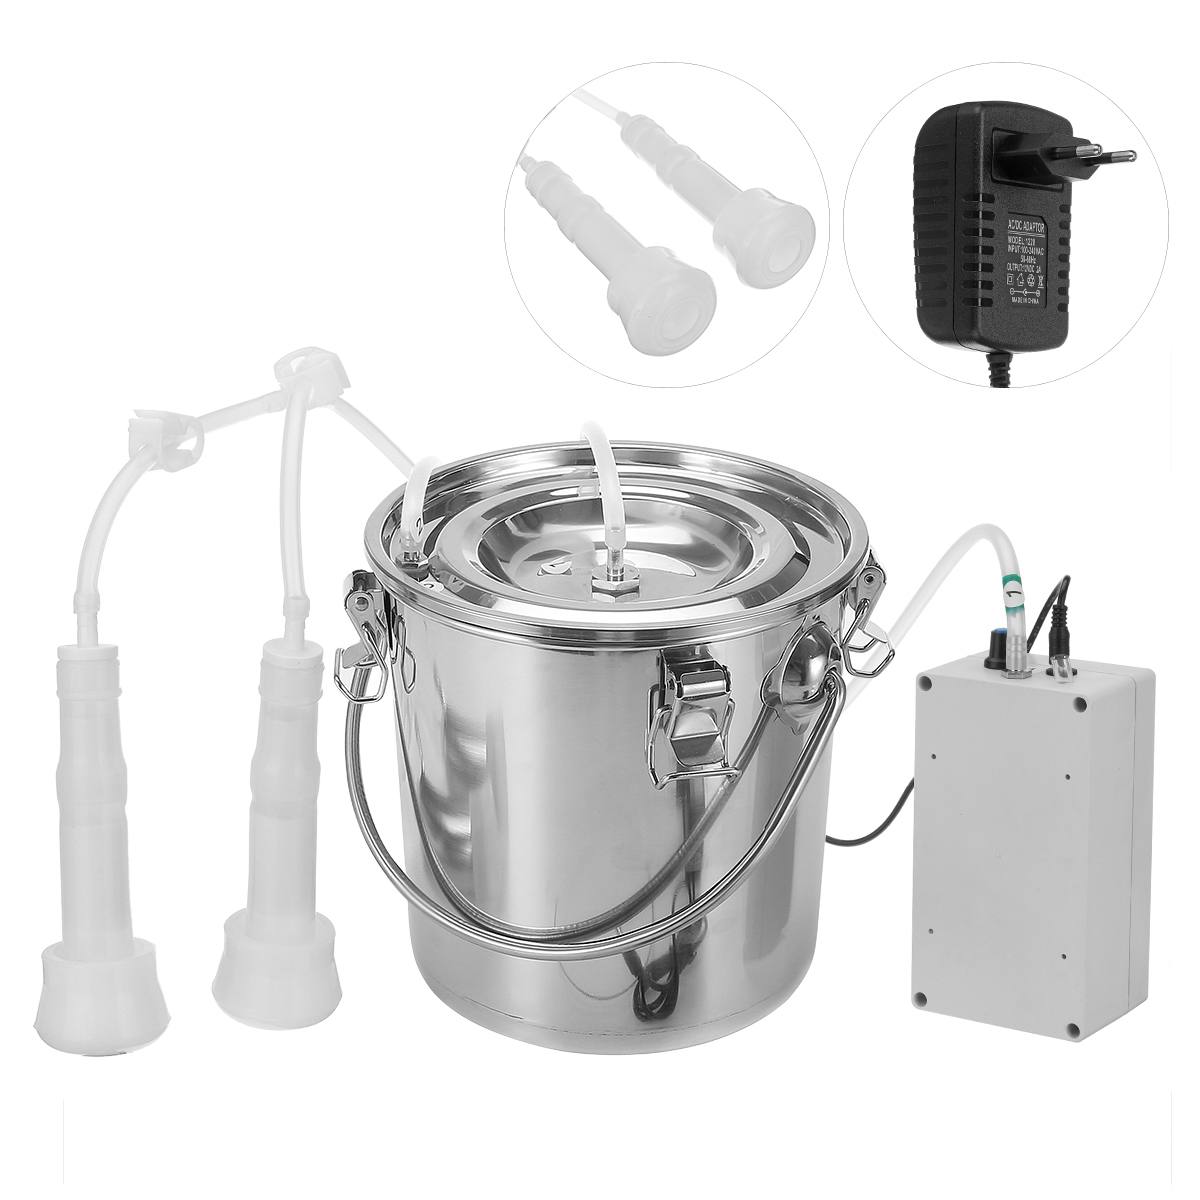 5L Electric Milking Machine Stainless Steel Milker For Farm Cows Goats Vacuum Pump Bucket 220/110V Pasture Cow Sheep Milker